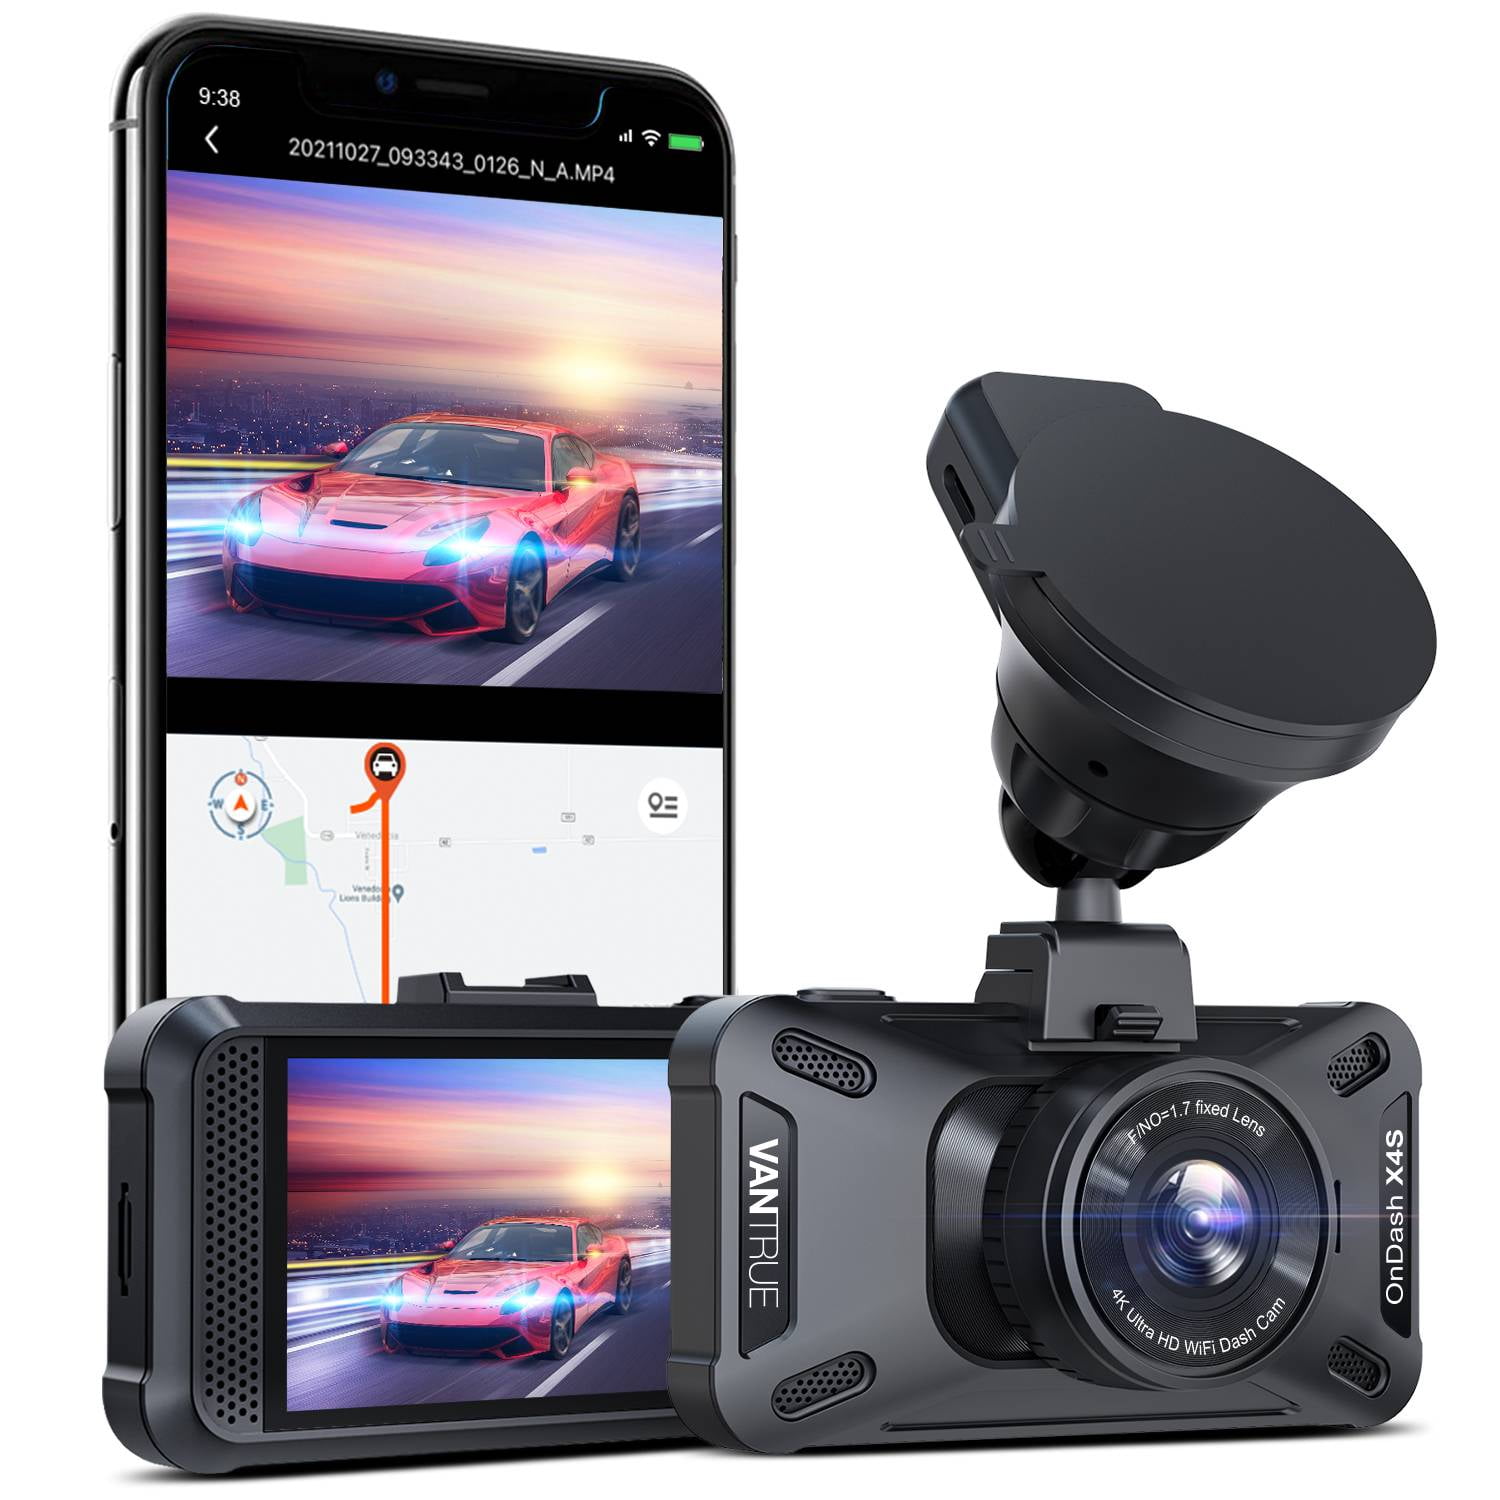 Vantrue UHD 4K WiFi Dash Cam for Cars, 2160PX30FPS Wireless Car Dash Camera  with 5 Ghz/2.4Ghz and Vantrue Cam APP, Superior Night Vision with WDR, 24/7  Parking Monitor, GPS, G-sensor (X4S W) 